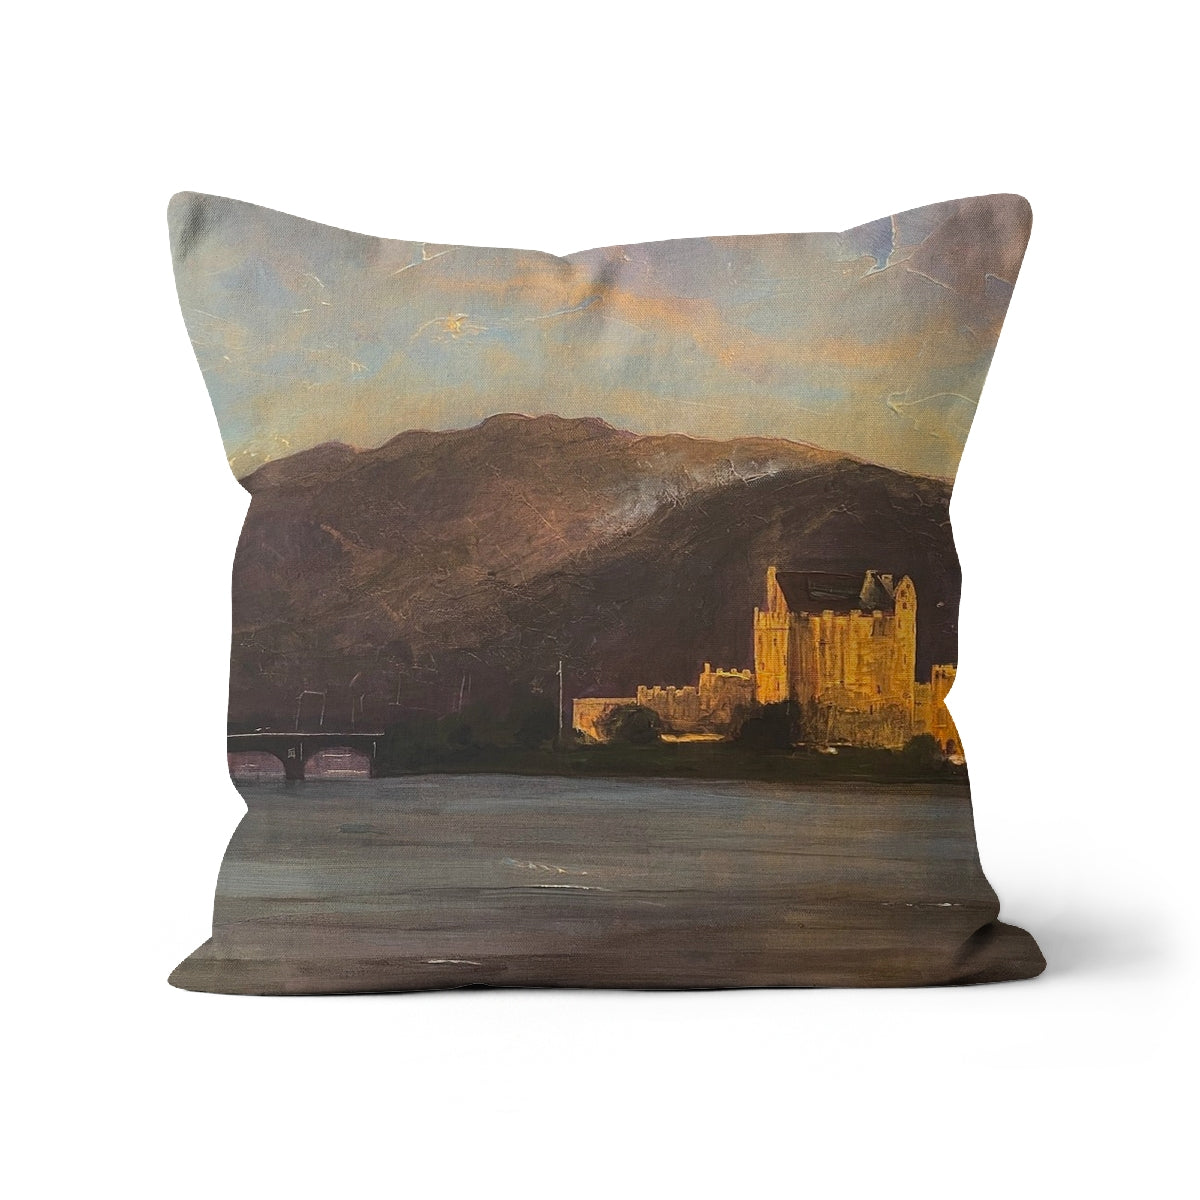 Eilean Donan Castle Art Gifts Cushion-Cushions-Historic & Iconic Scotland Art Gallery-Canvas-22"x22"-Paintings, Prints, Homeware, Art Gifts From Scotland By Scottish Artist Kevin Hunter